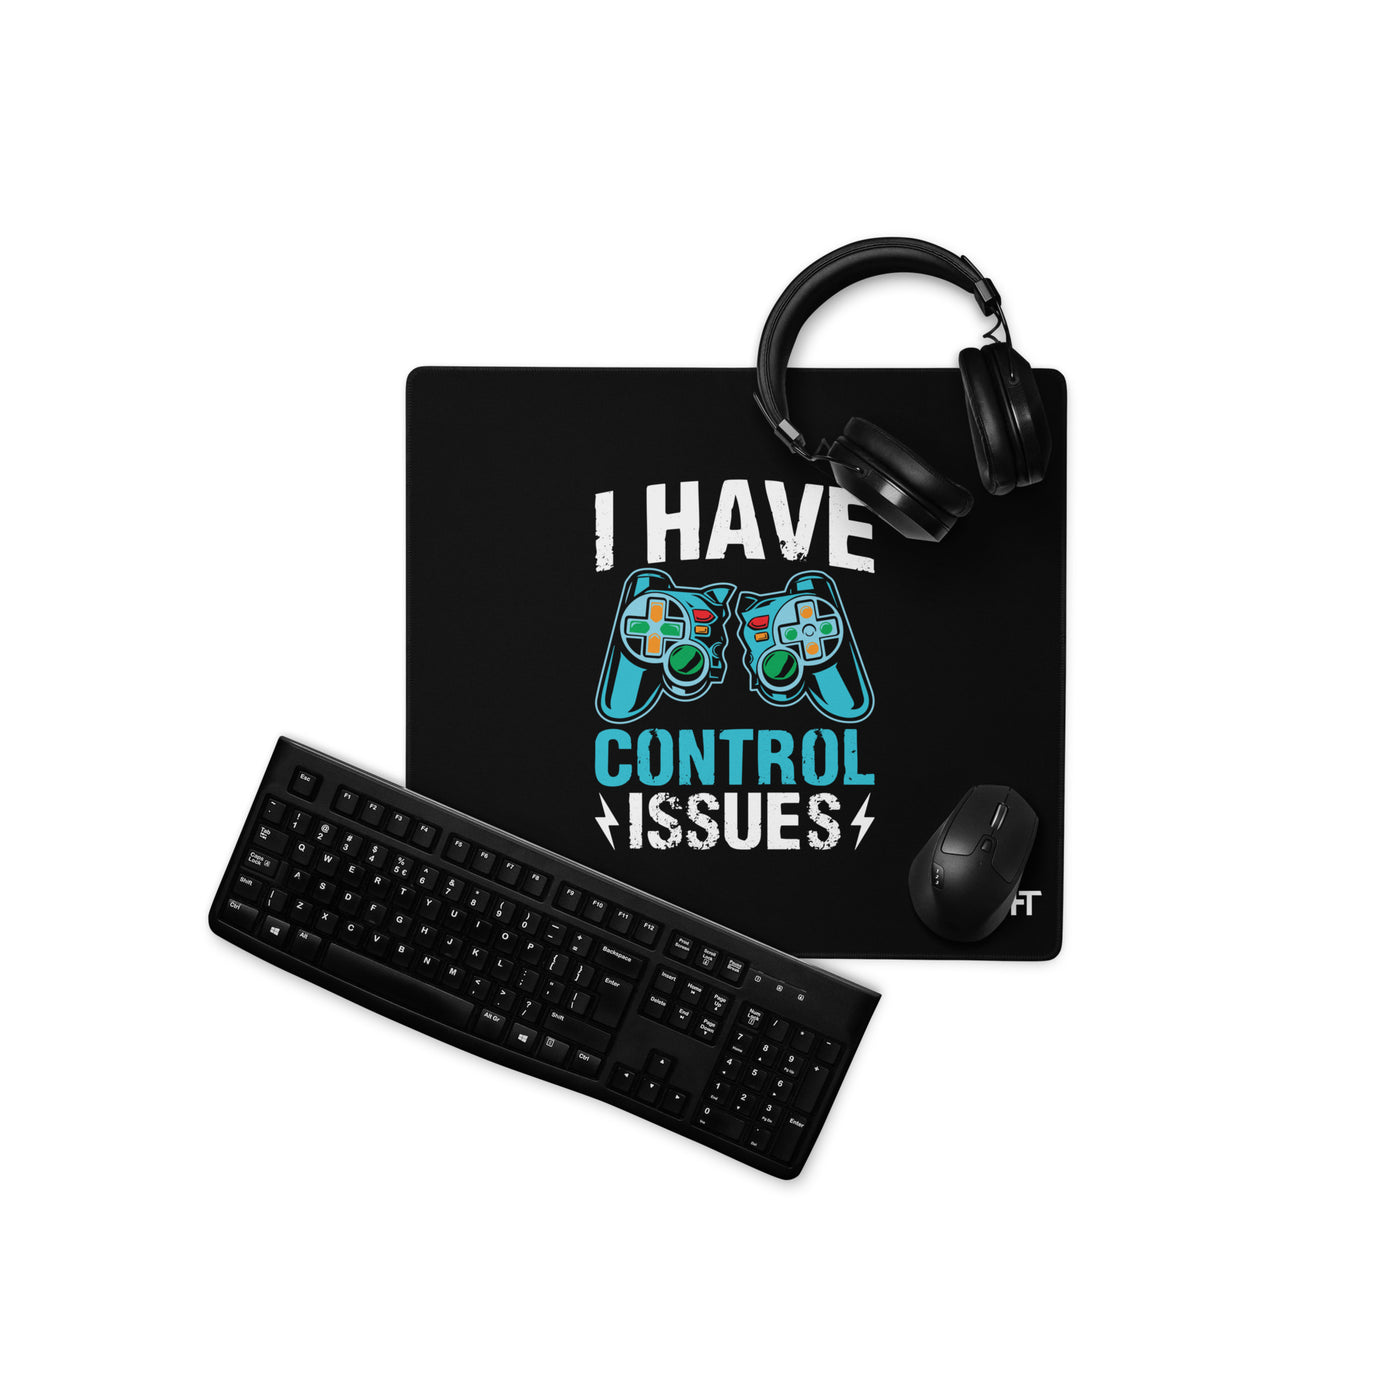 I have Control Issues - Desk Mat